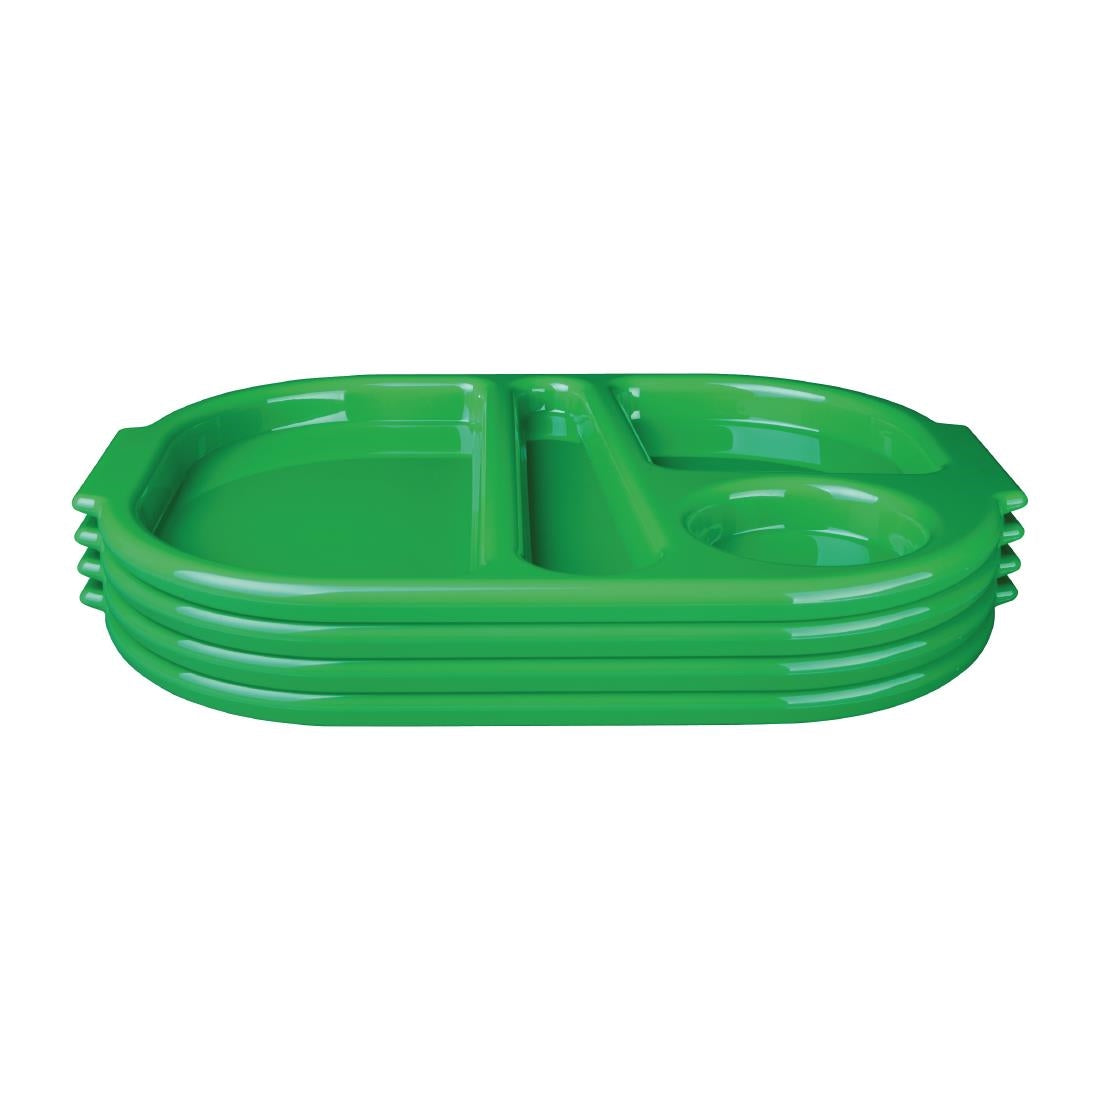 Kristallon Large Polycarbonate Compartment Food Trays Green 375mm JD Catering Equipment Solutions Ltd